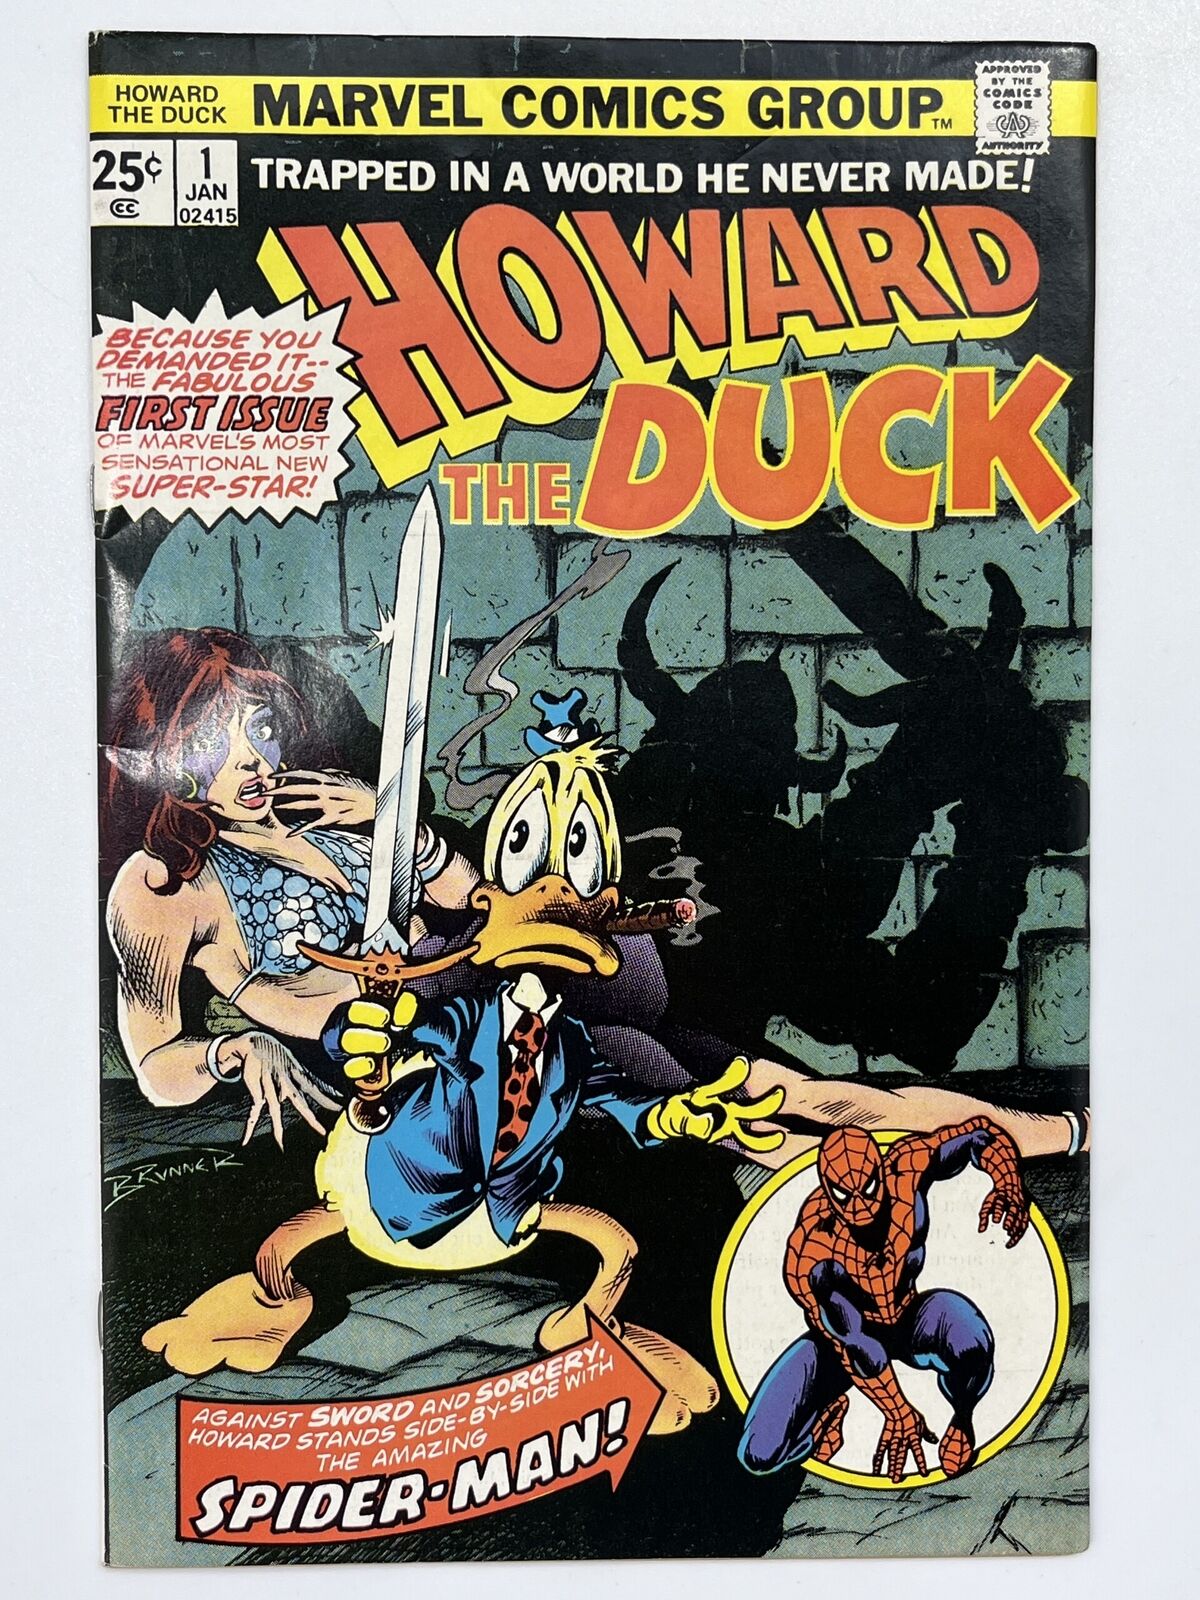 Howard the Duck #1 (1975) 1st Issue in 7.0 Fine/Very Fine